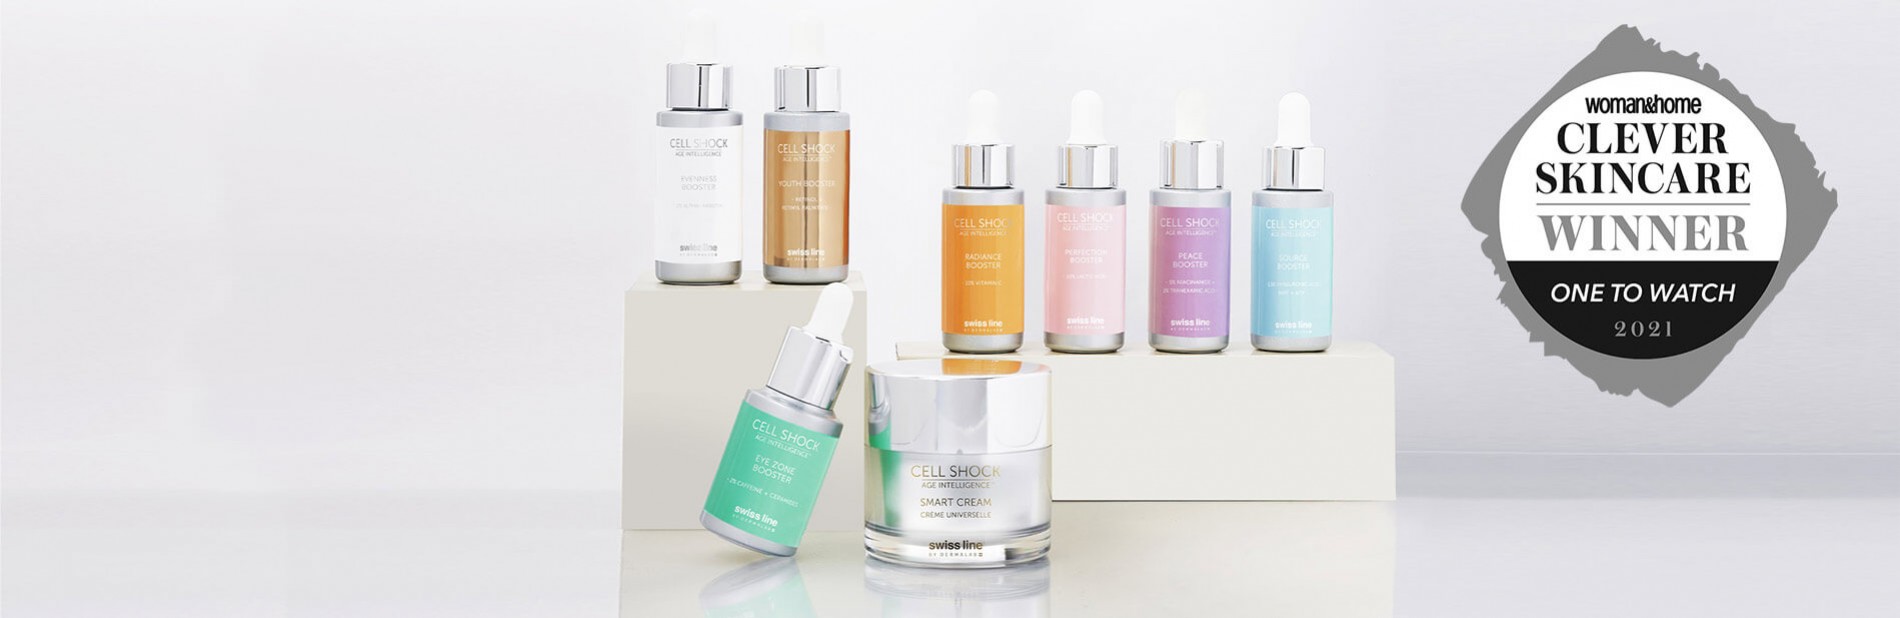 „ONE TO WATCH“-GEWINNER DER WOMAN & HOME CLEVER SKINCARE AWARDS